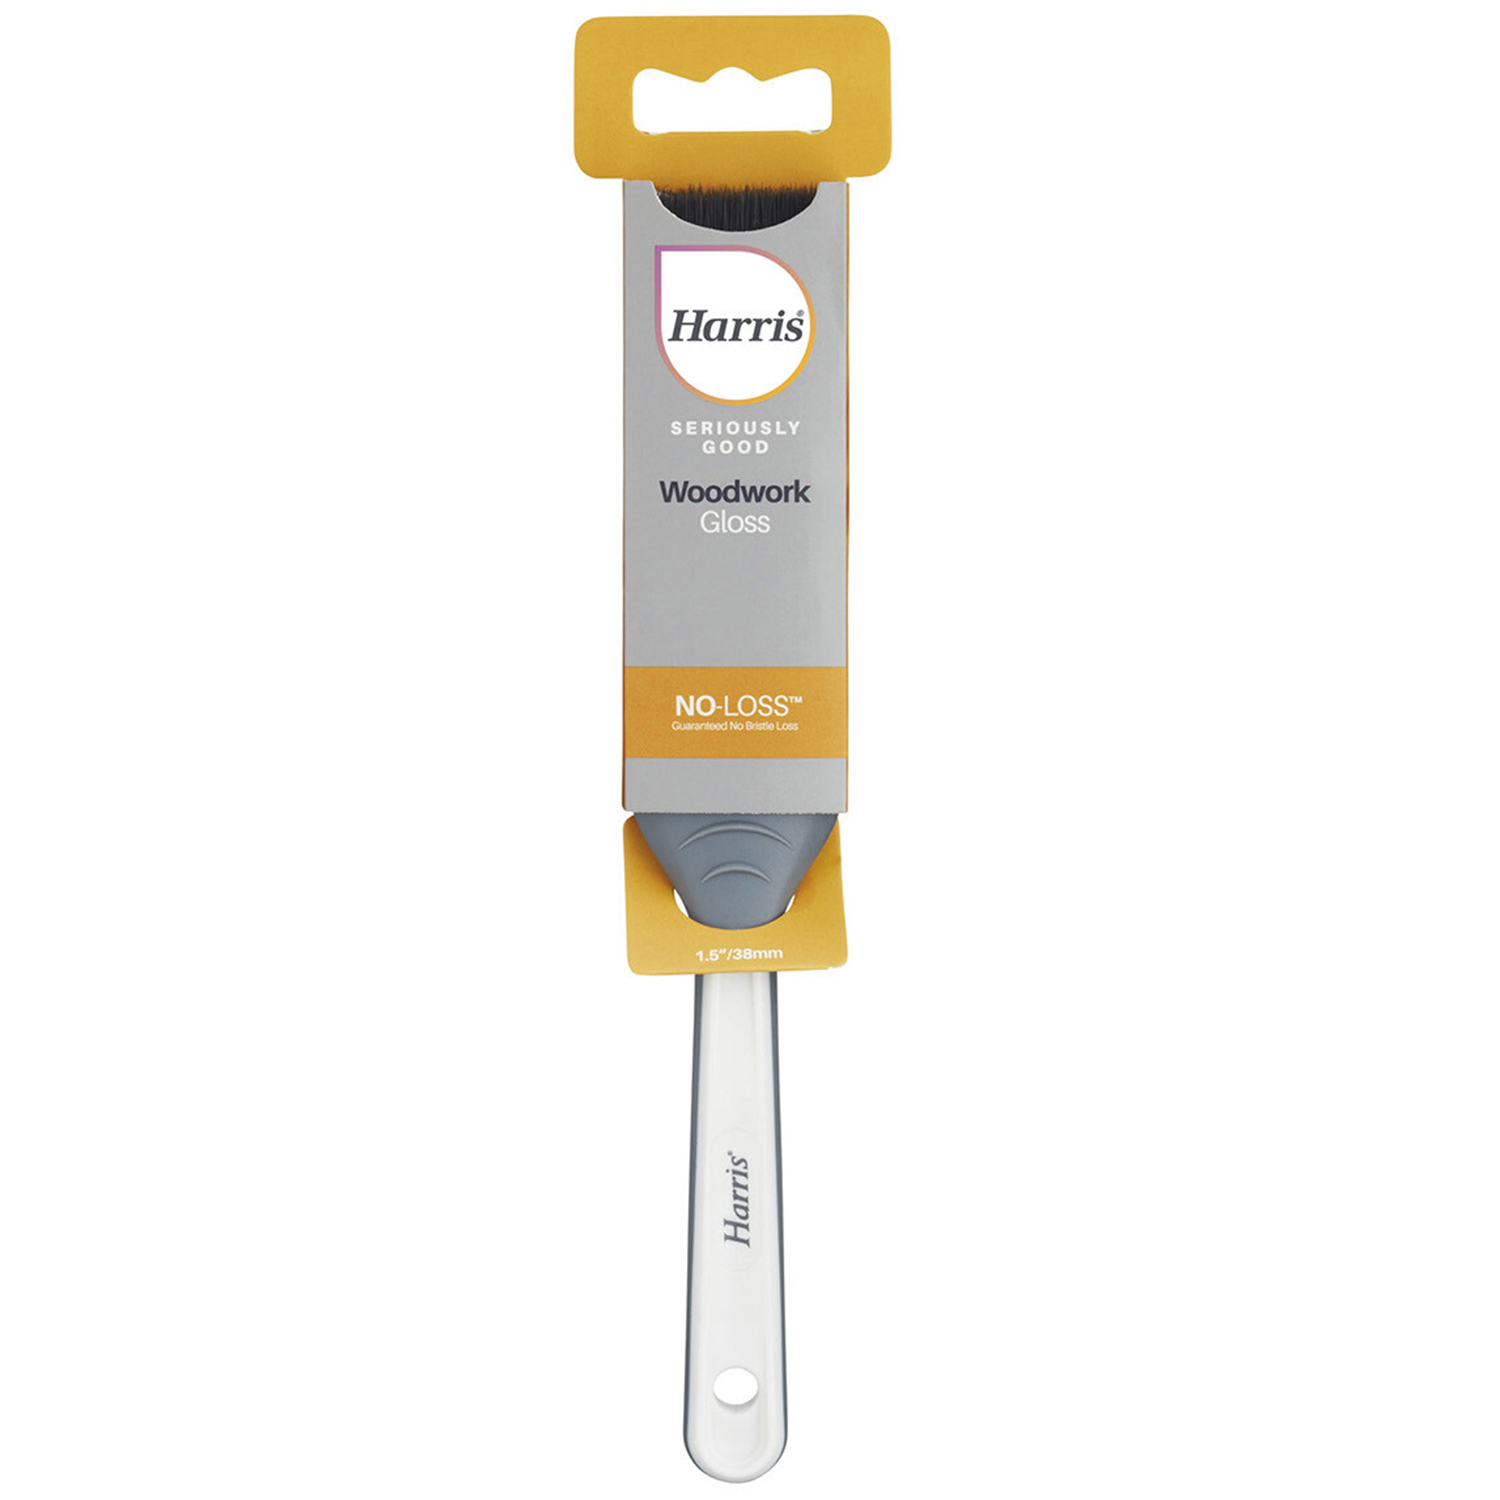 Harris 1.5 inch Seriously Good Woodwork Gloss Paint Brush Image 1